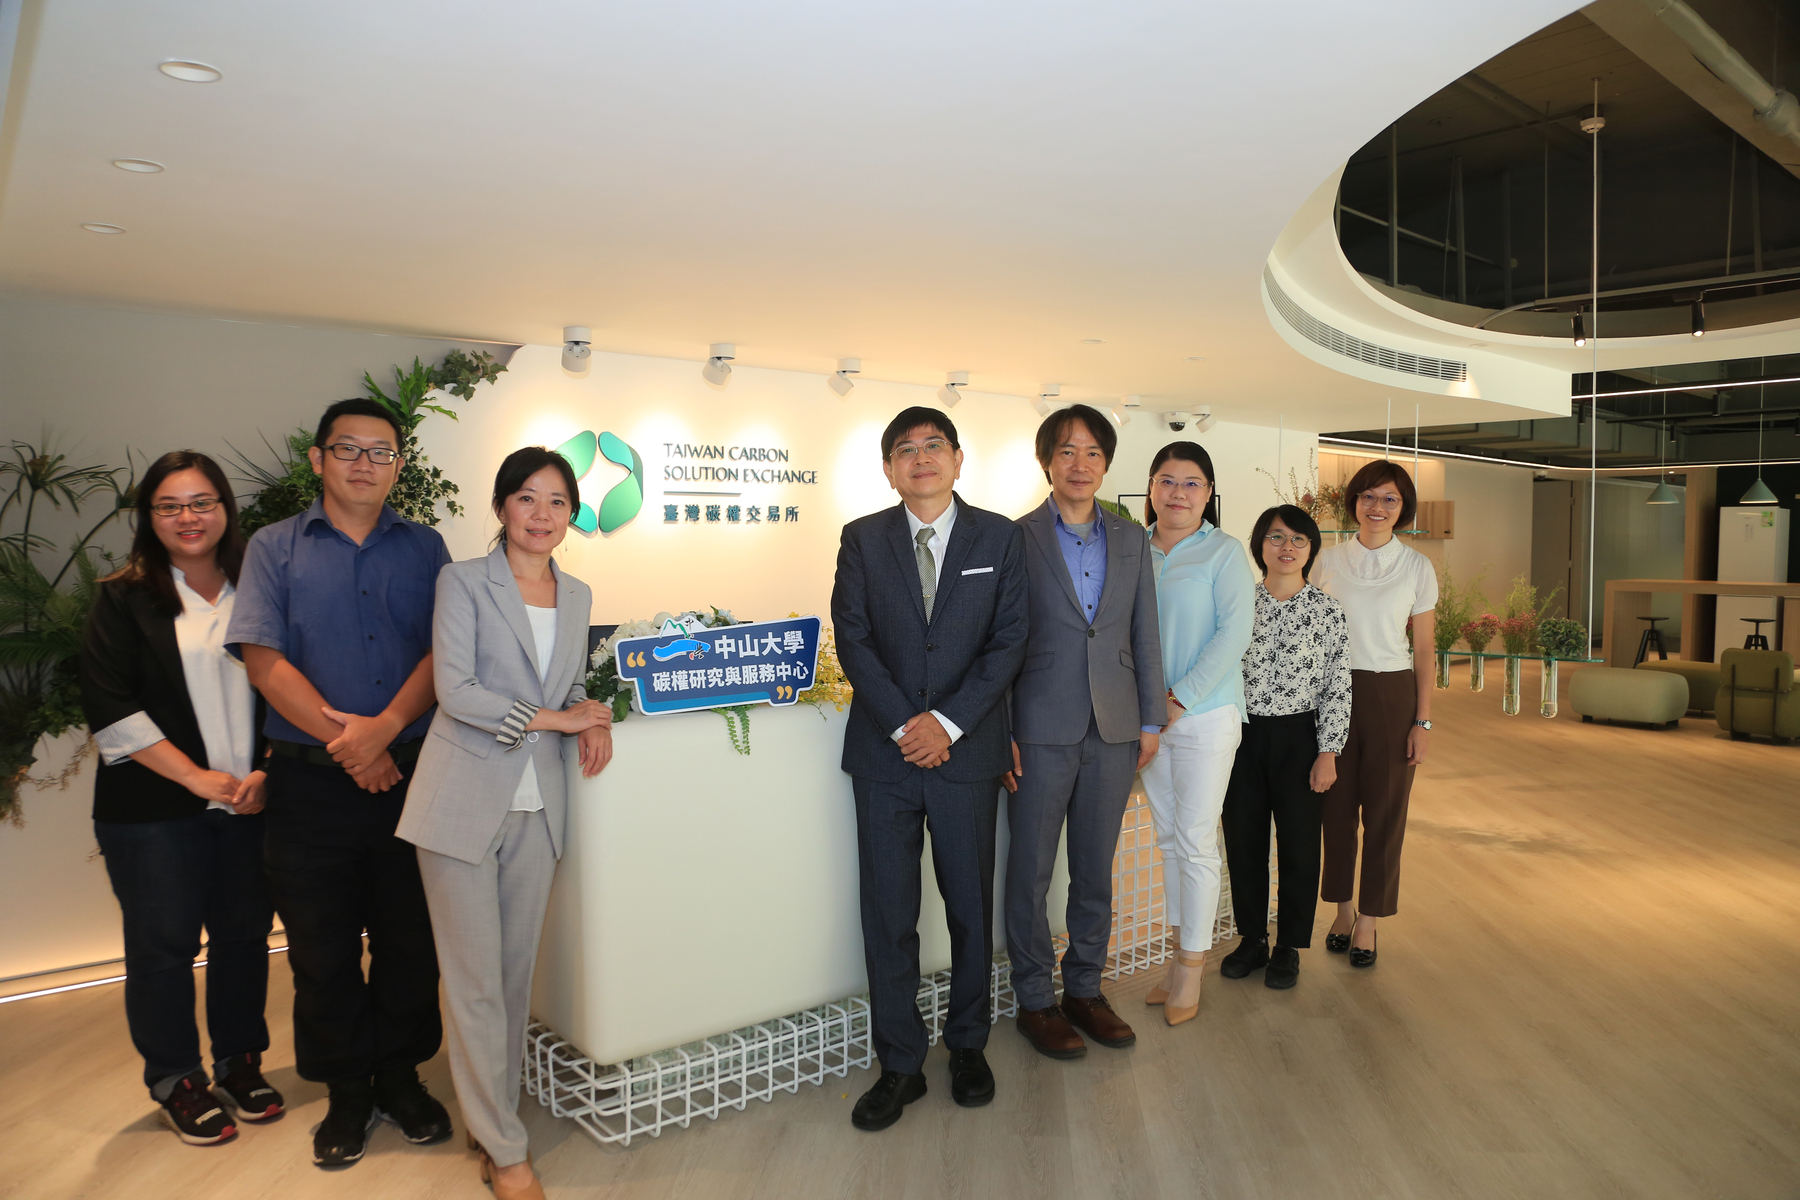 NSYSU has established the Center for Carbon Research and Solutions (CCRS) as a pioneering green economy think tank in Taiwan.